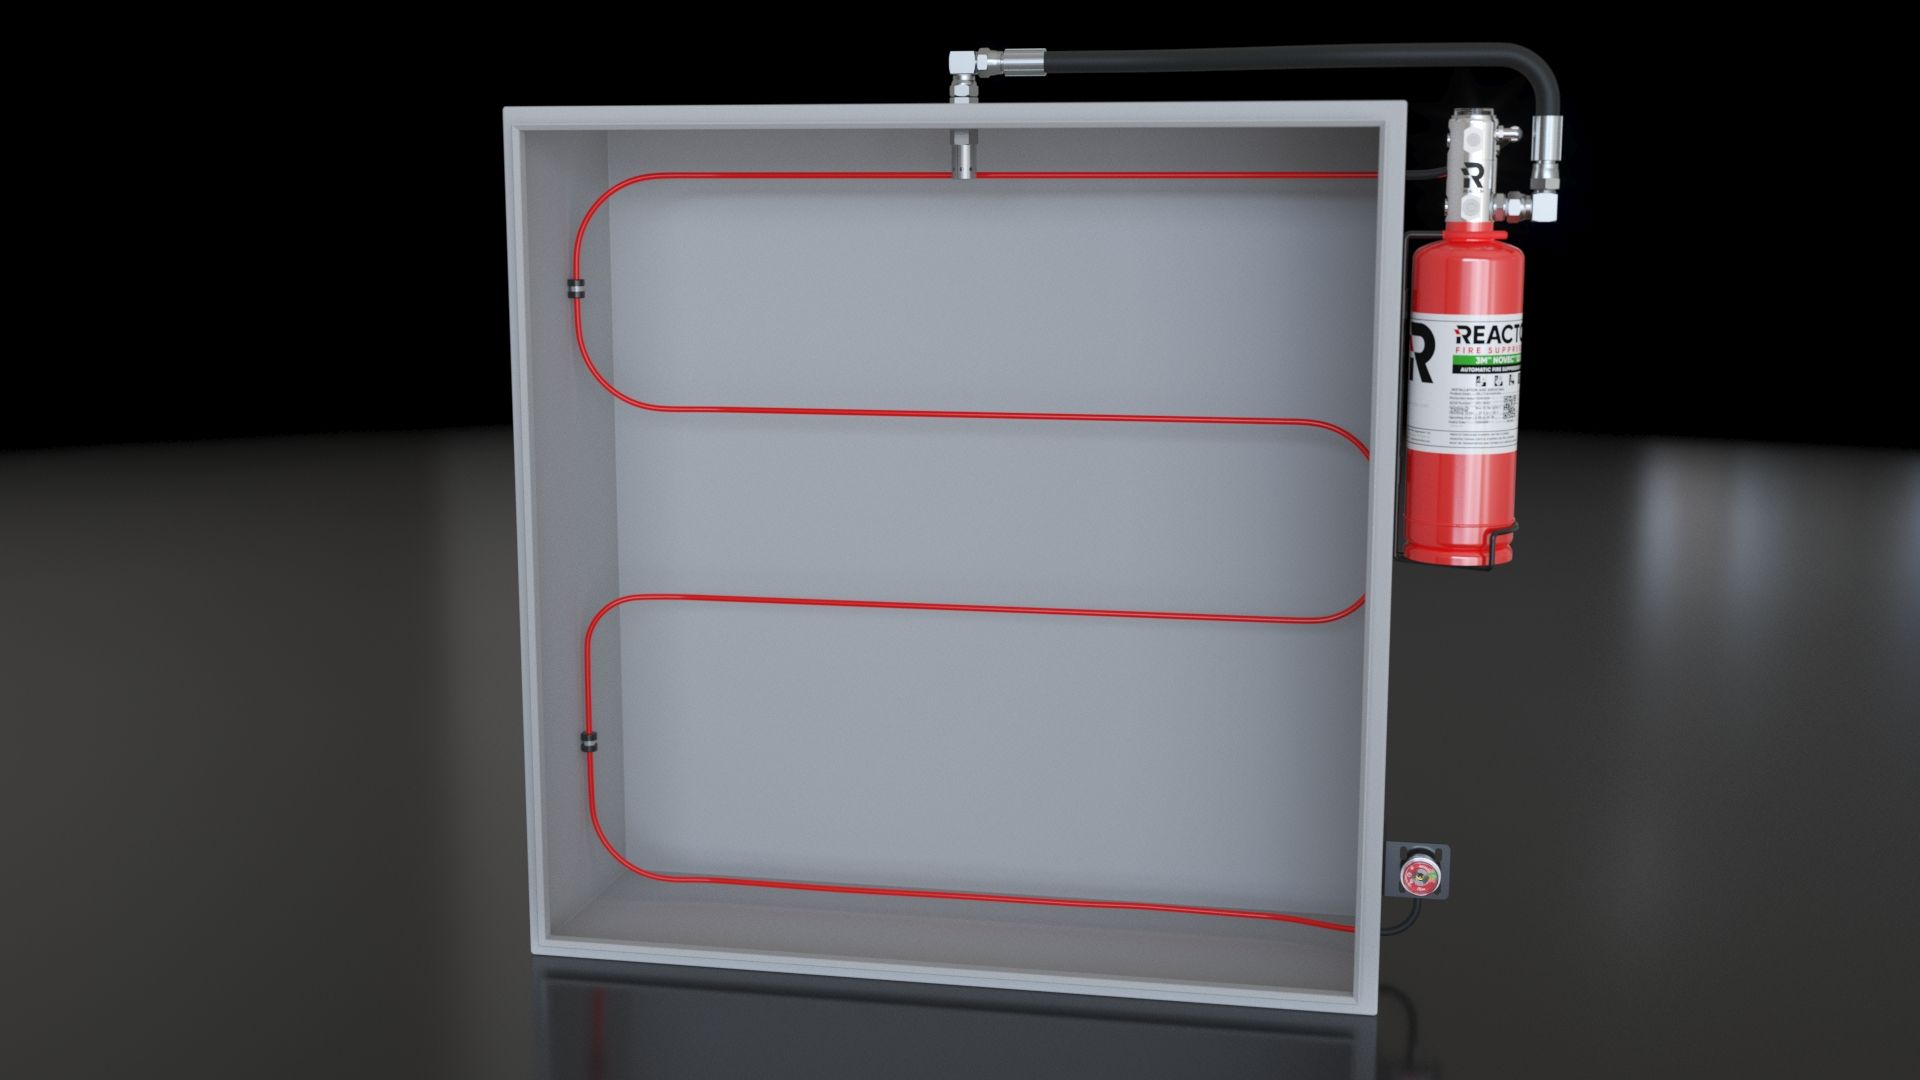 Indirect Low Pressure Reacton Fire Suppression System